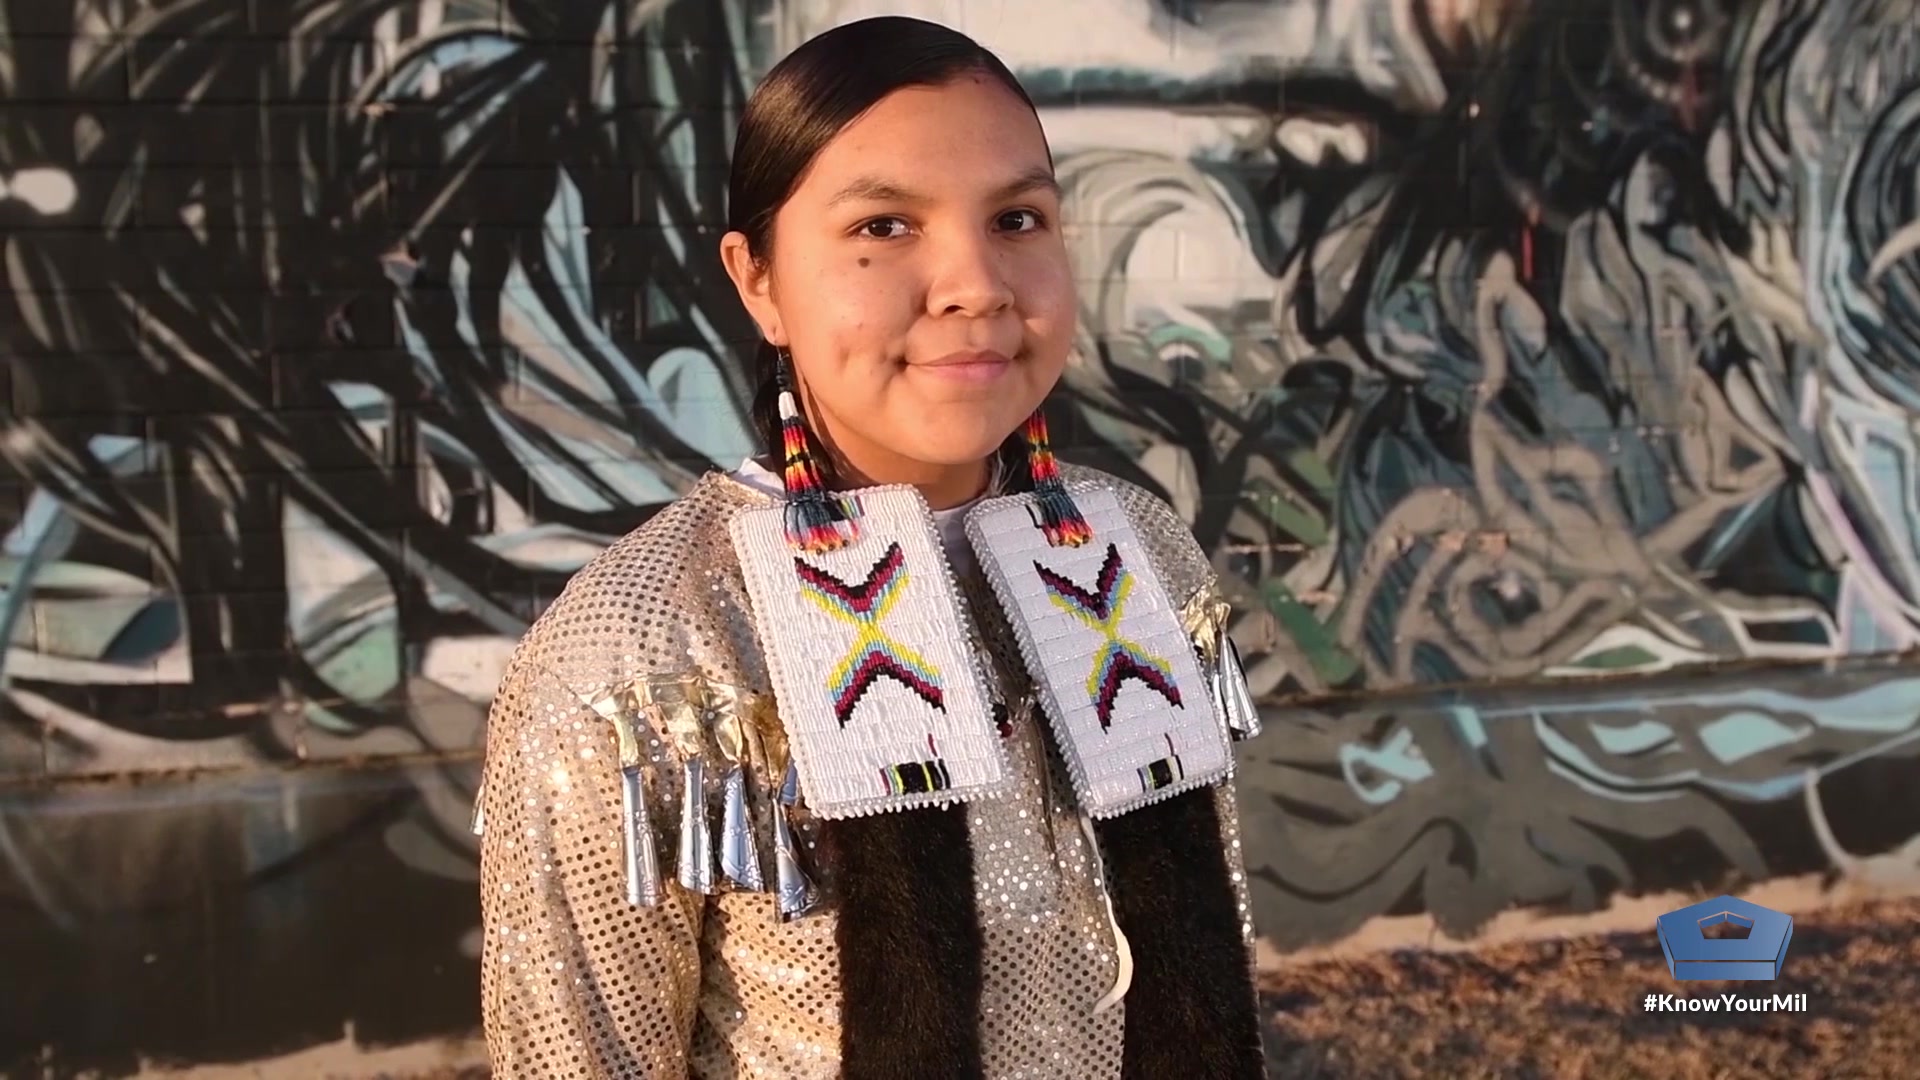 This sailor celebrates her military and cultural heritage through dance. Petty Officer 2nd Class Anita Y. Chebahtah travels to Concho, Okla., to lead her family in a special Native American tradition.

Video by Navy Petty Officer 2nd Class Kashif Basharat